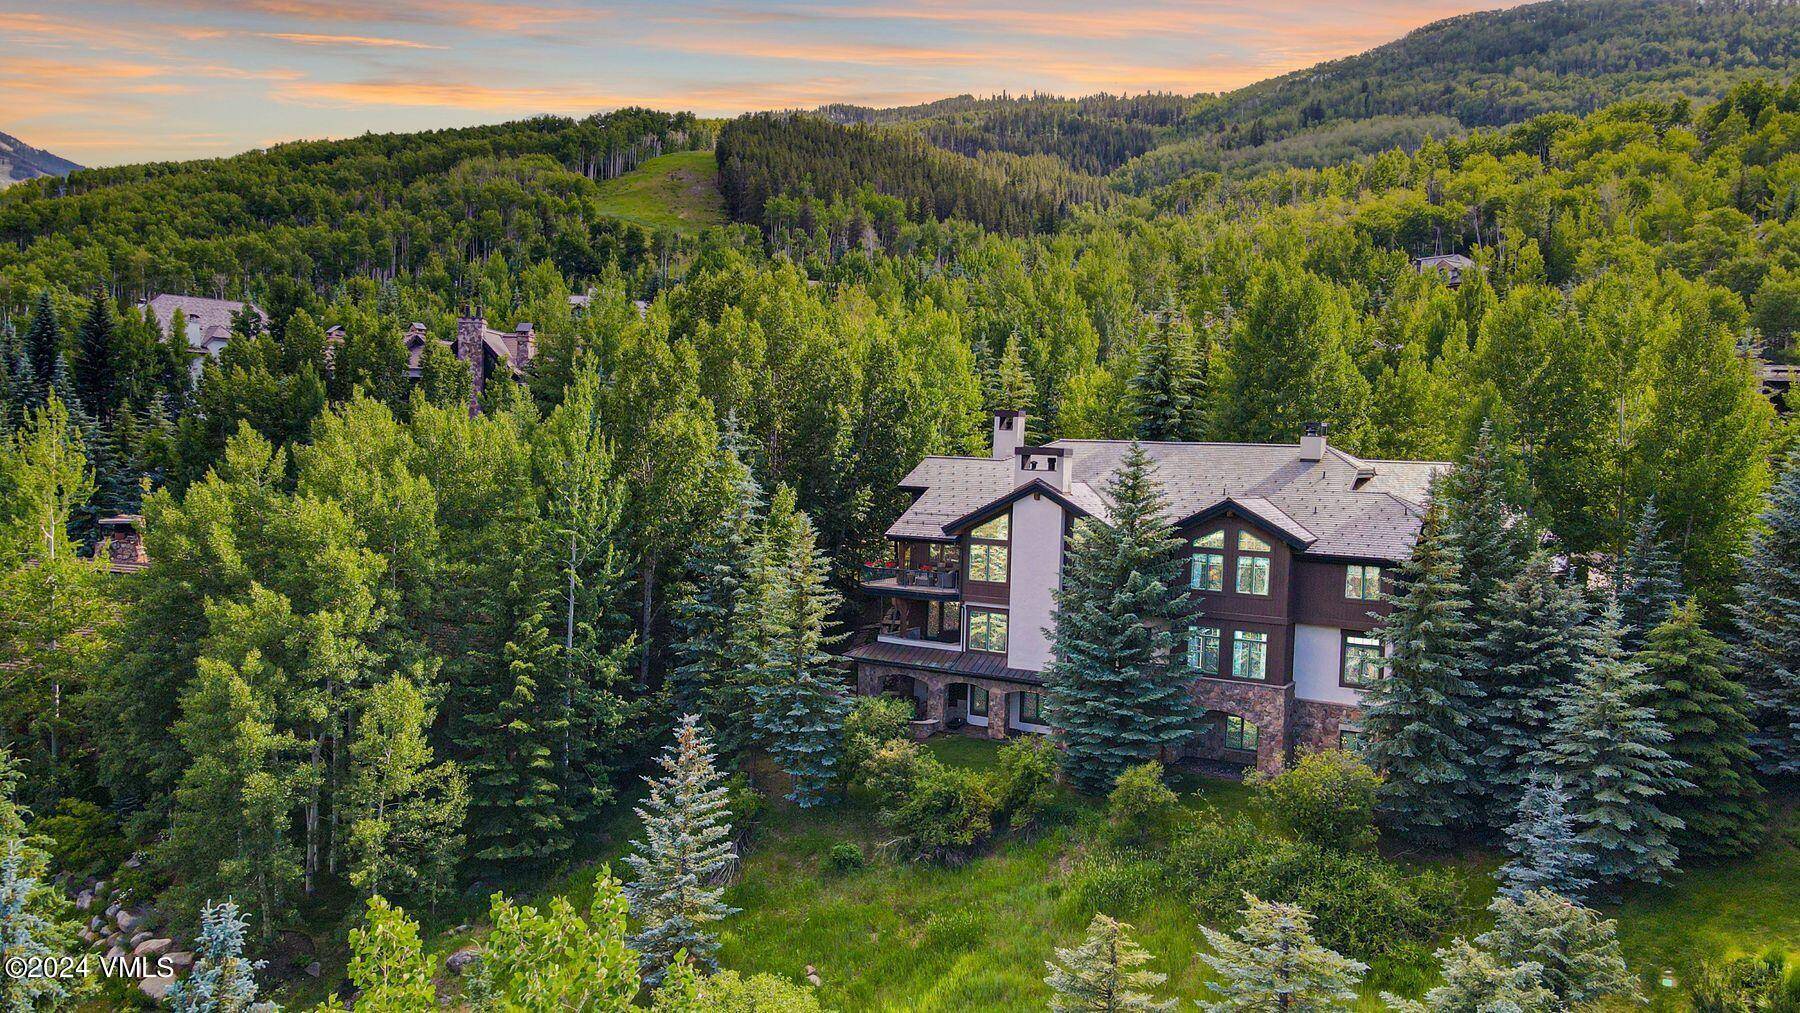 Nestled within the exclusive gates of Beaver Creek Resort in the heart of the Colorado Rockies, this awe inspiring seven bedroom, timber frame residence is majestically perched along the prestigious ...